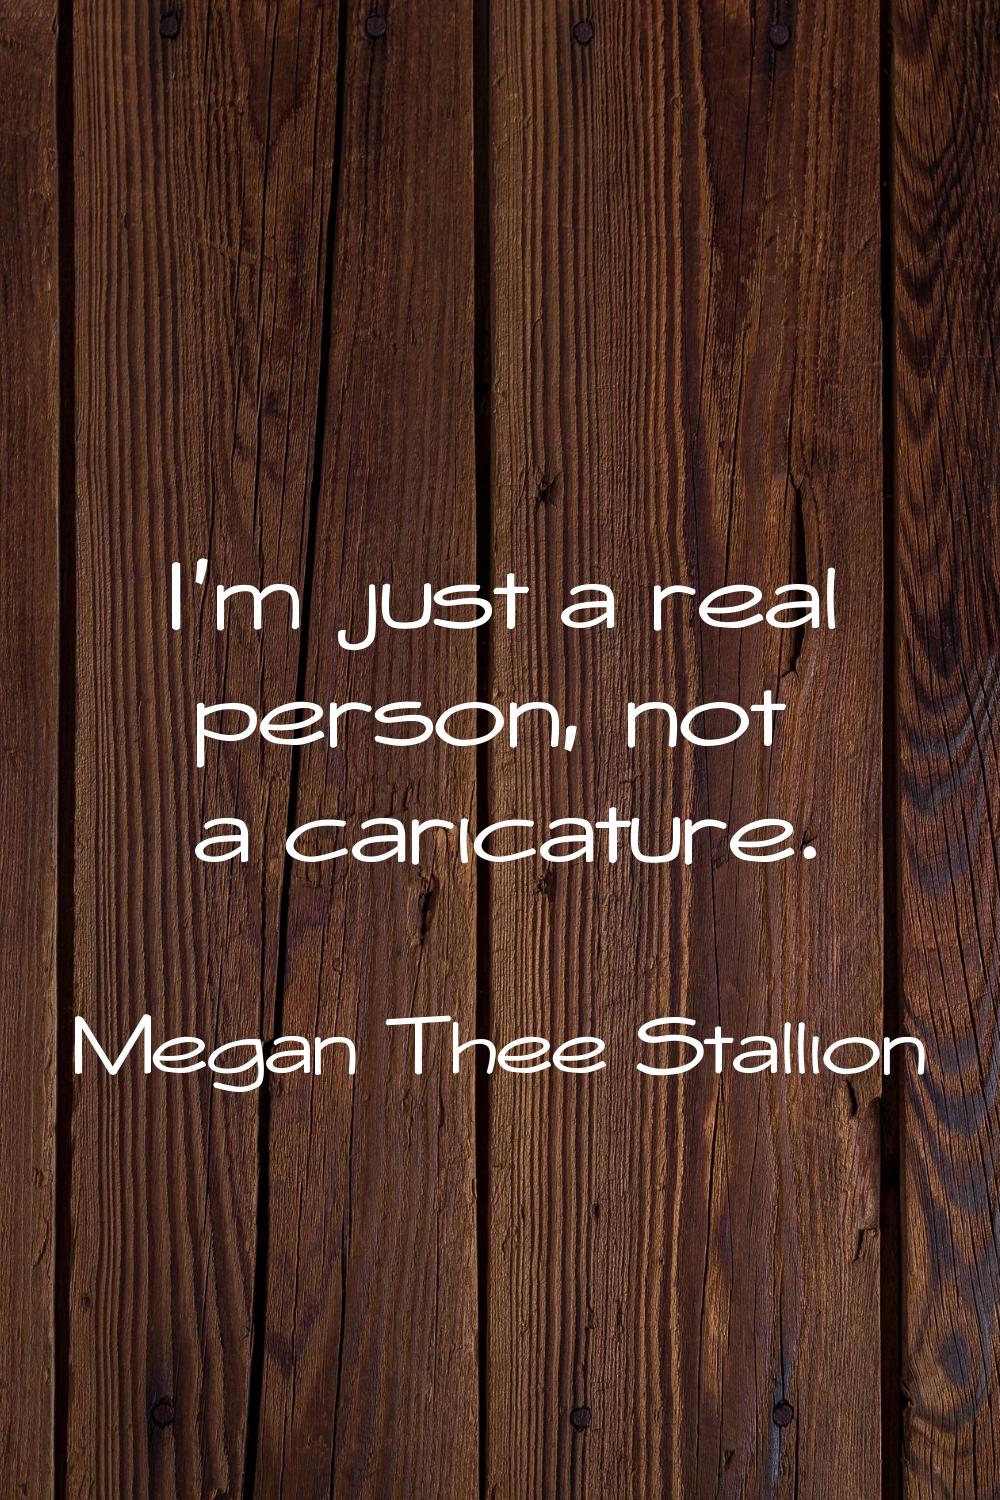 I'm just a real person, not a caricature.